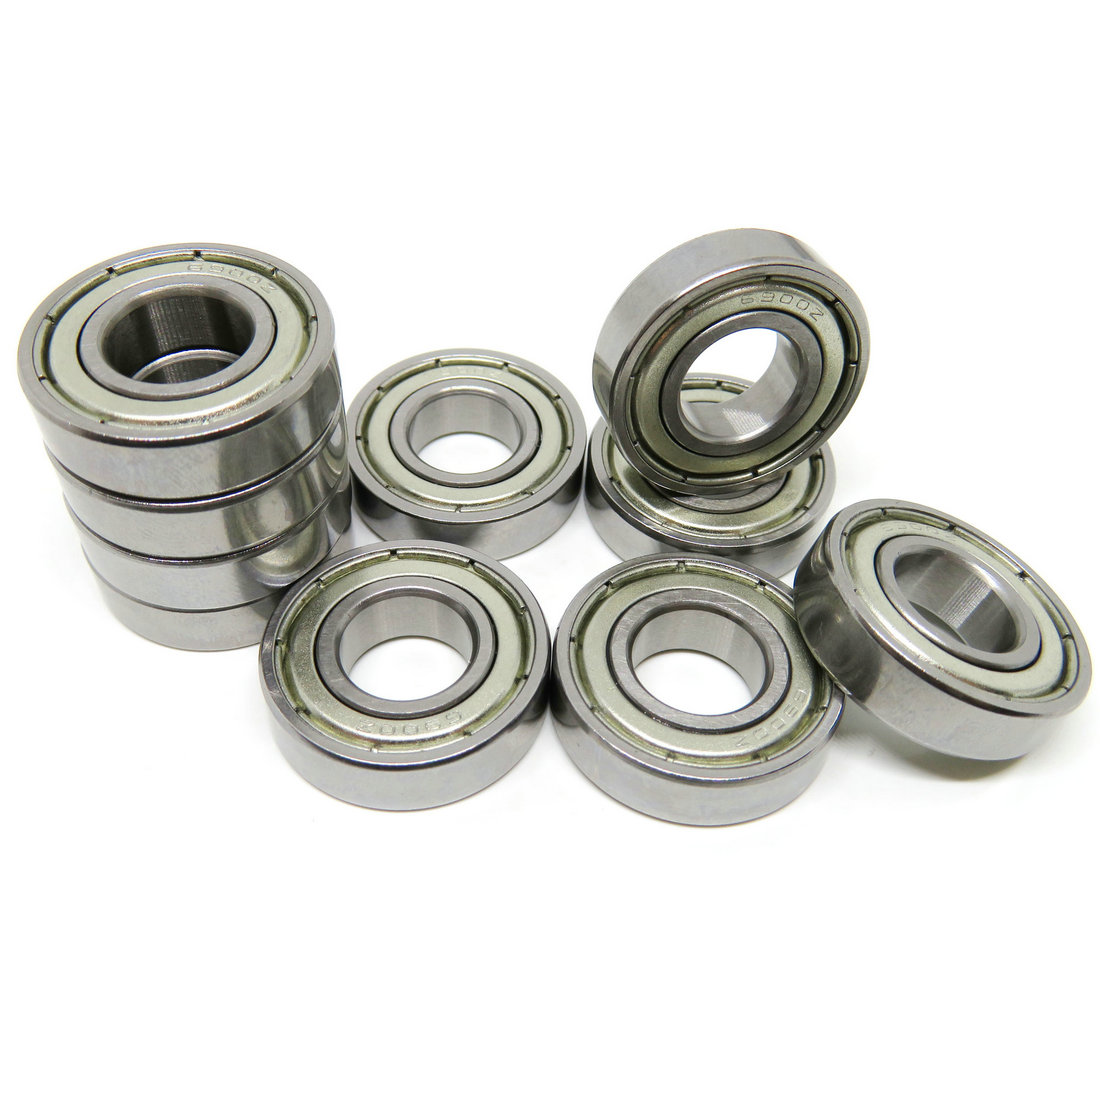 Thin section ball bearings 6900zz groove shielded wall bearing 10x22x6 6900 ZZ for scooter wheel